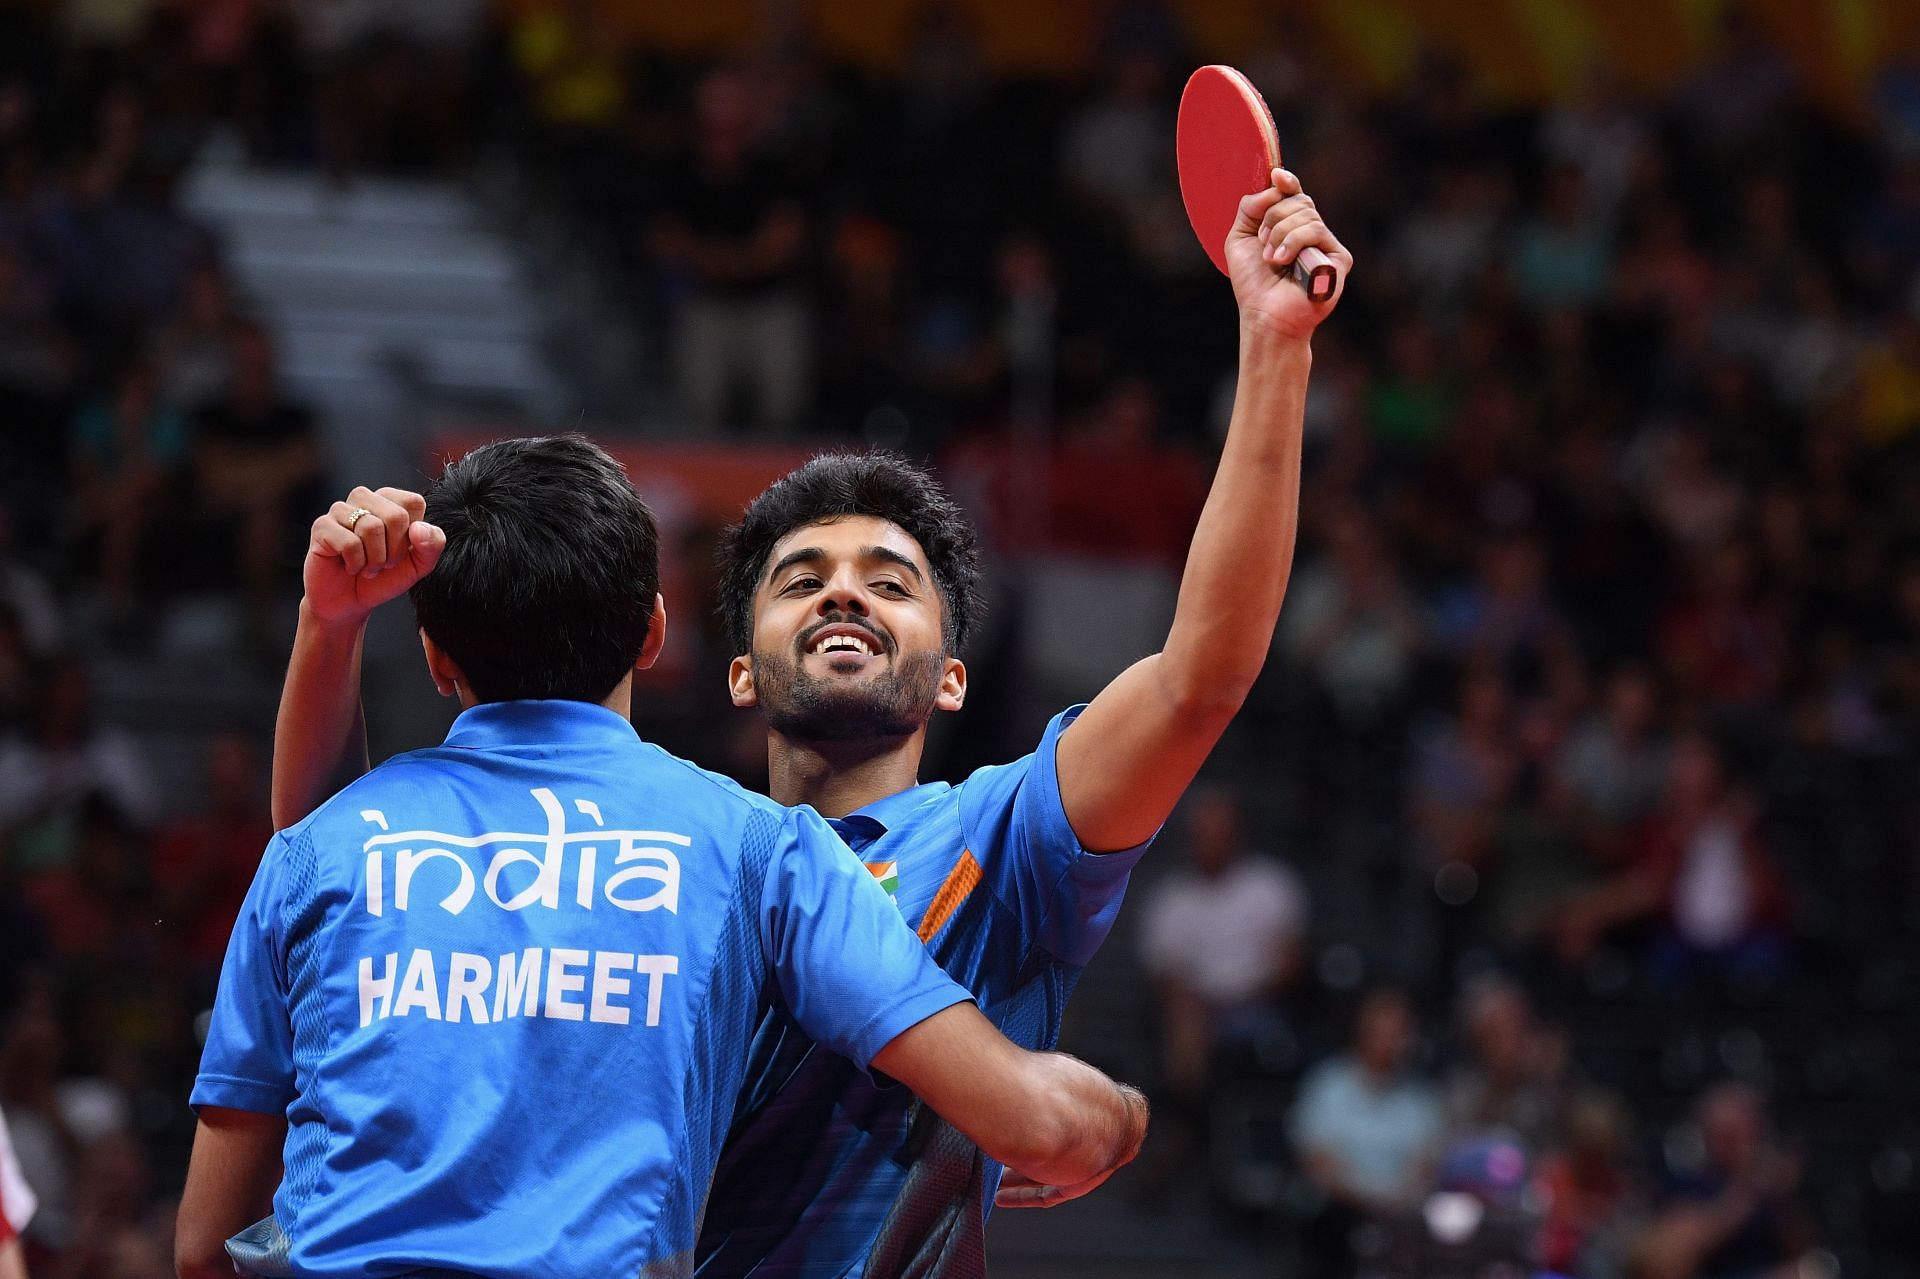 Sanil Shetty will be the top seed in the National Ranking Table Tennis Championships. (PC: Getty Images)